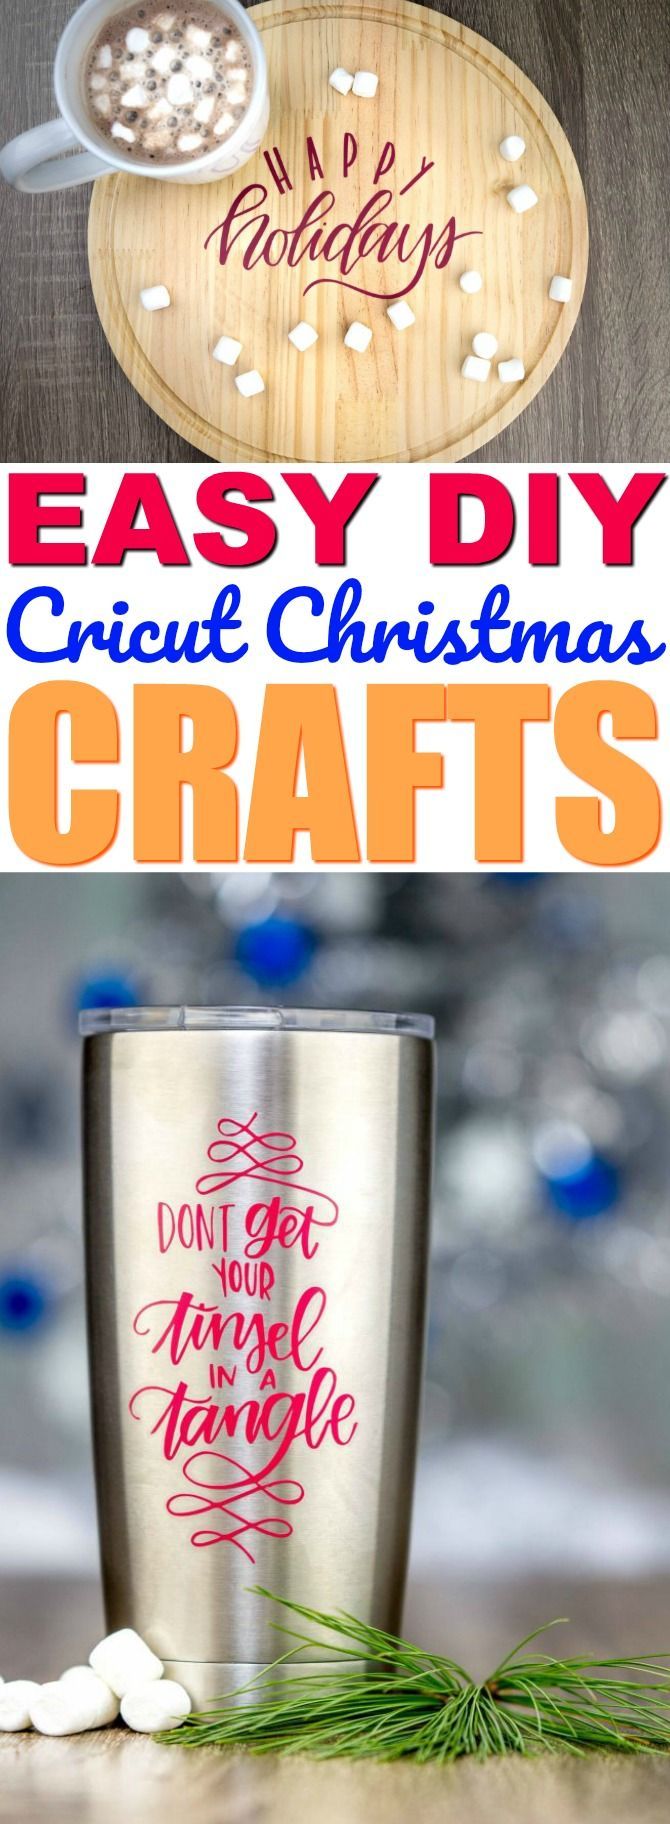 Today I want to share a ton of our favorite Easy DIY Cricut Christmas Crafts tha...